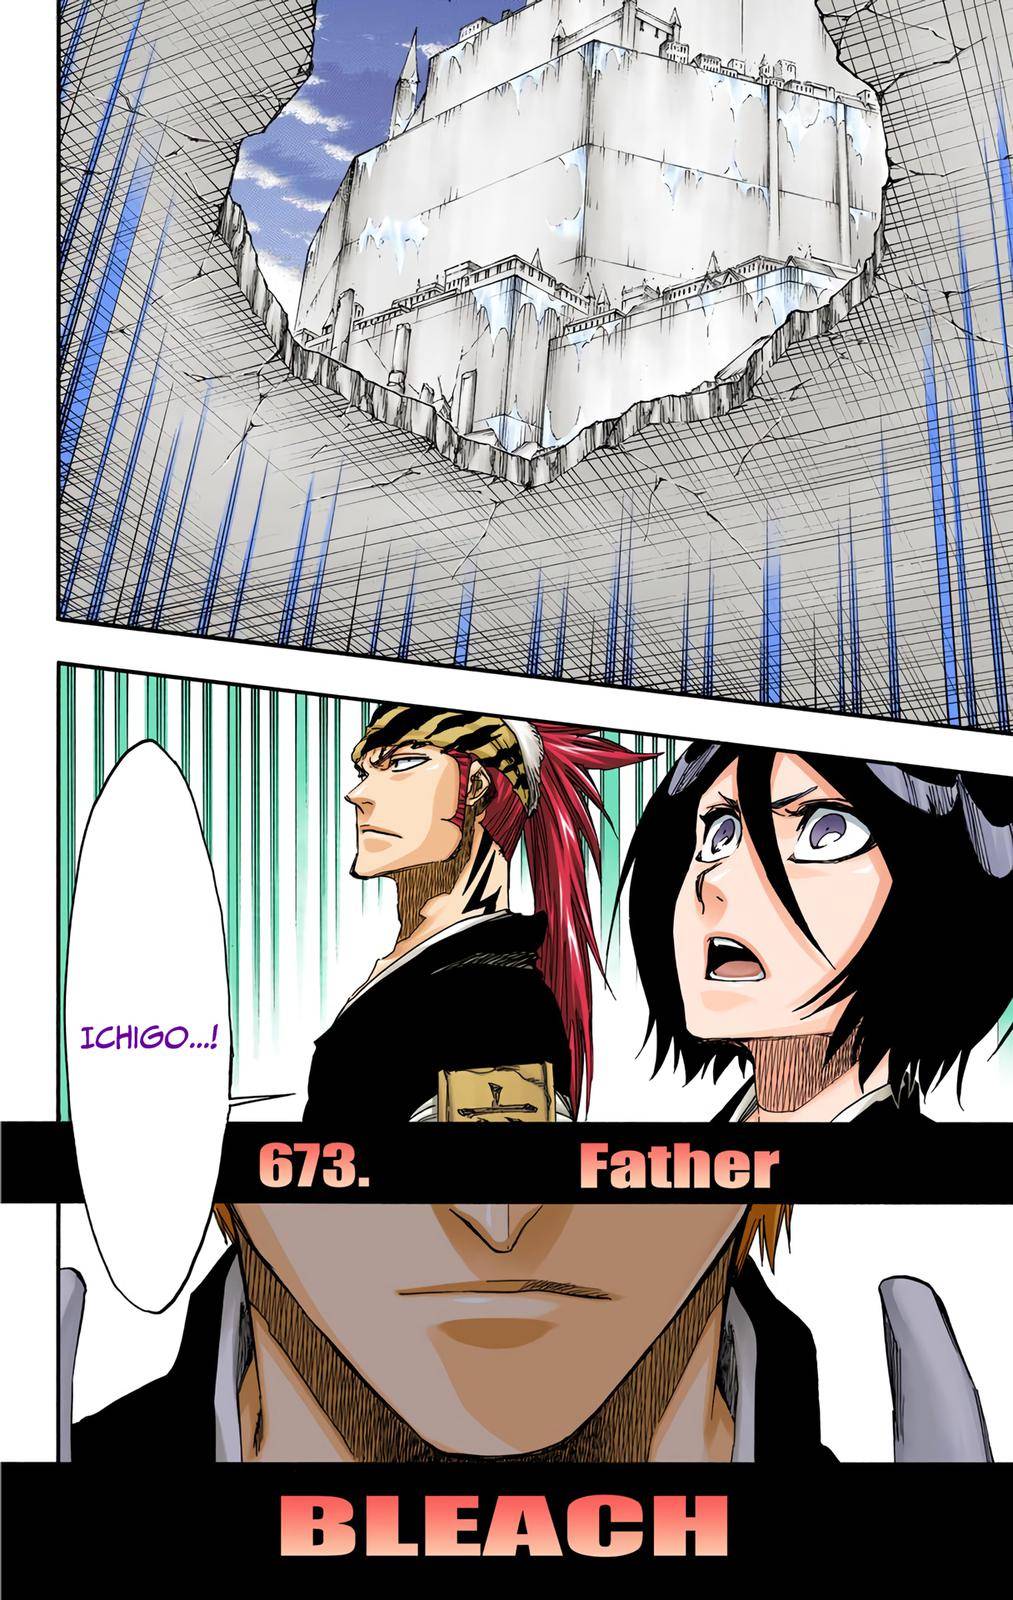 Bleach - Color - chapter 673 - #4